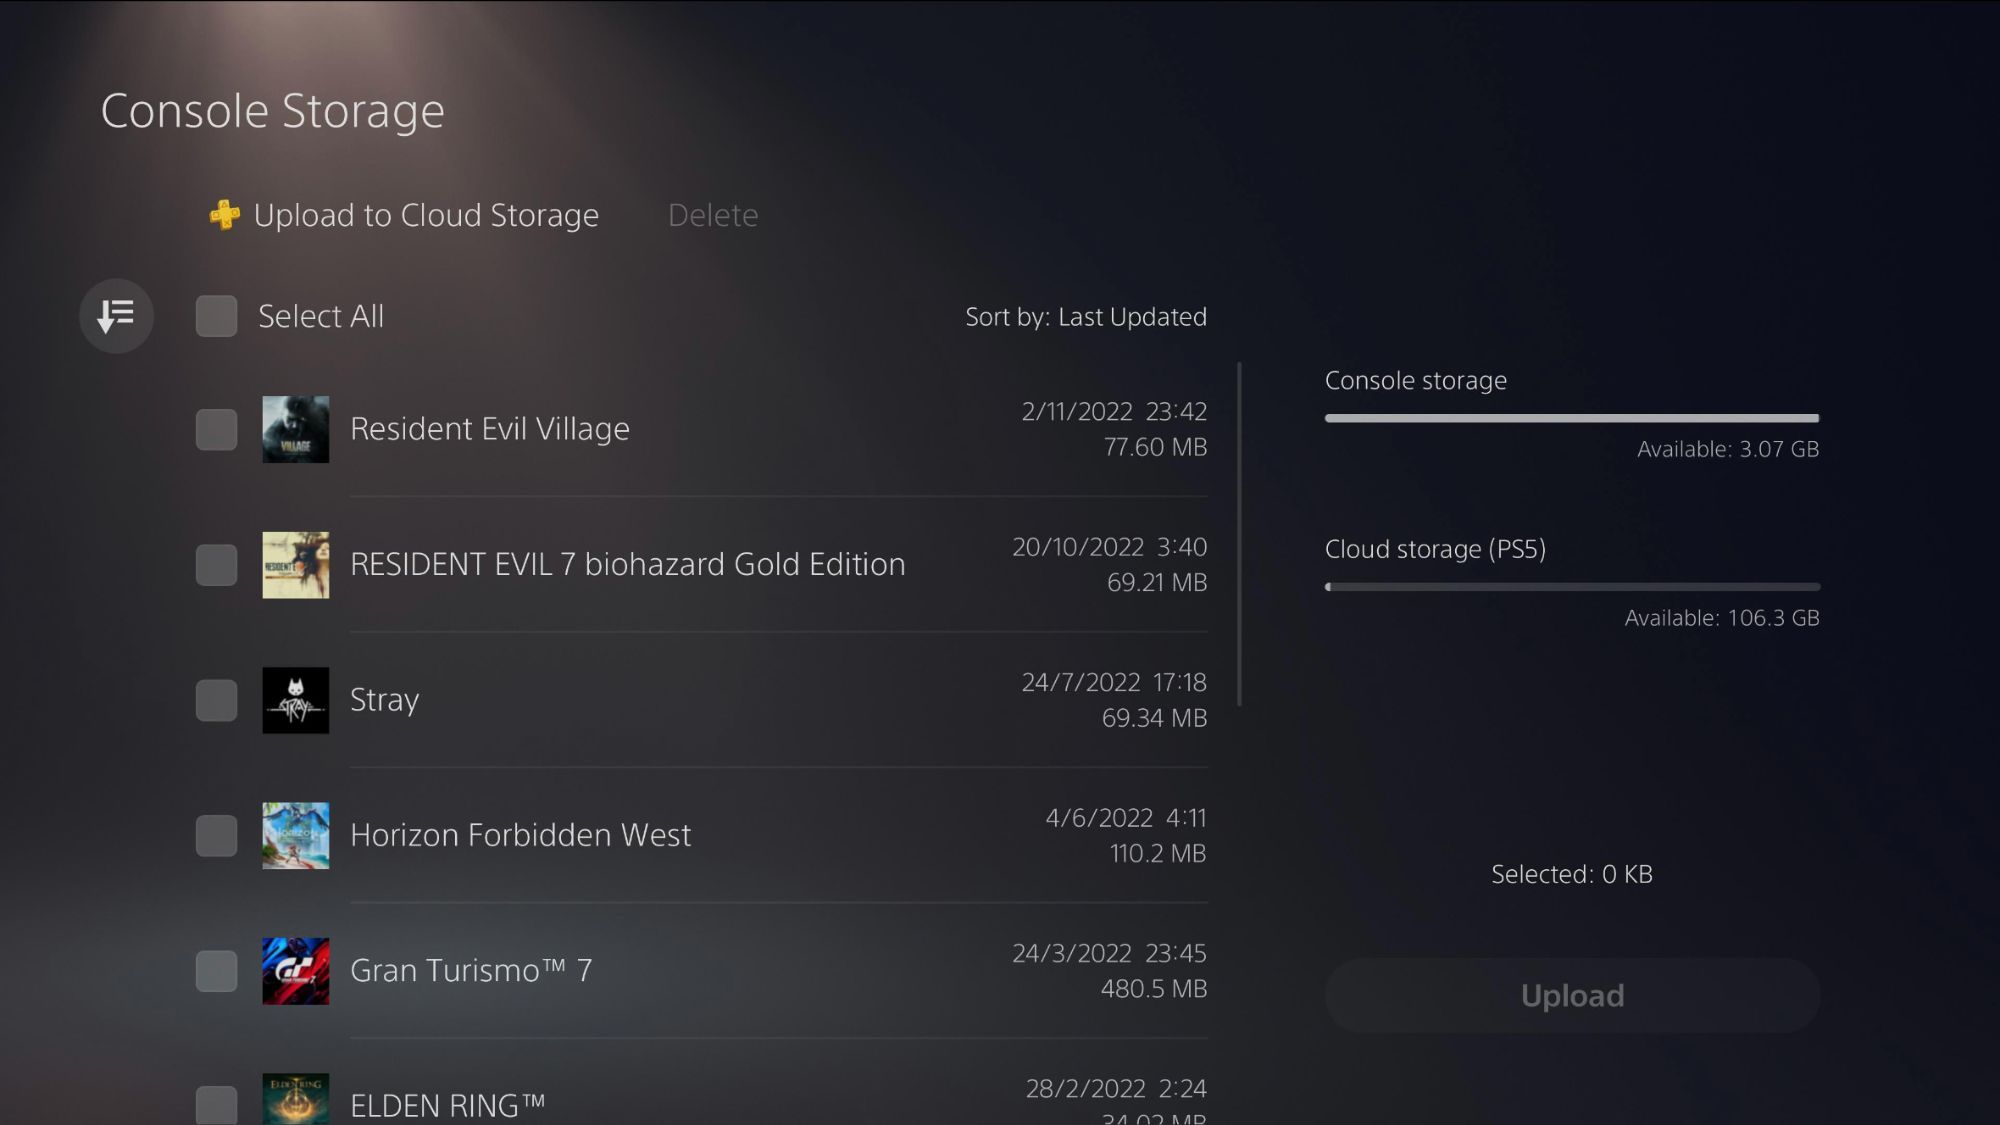 How to upload and delete data from cloud storage PS5 Console Storage